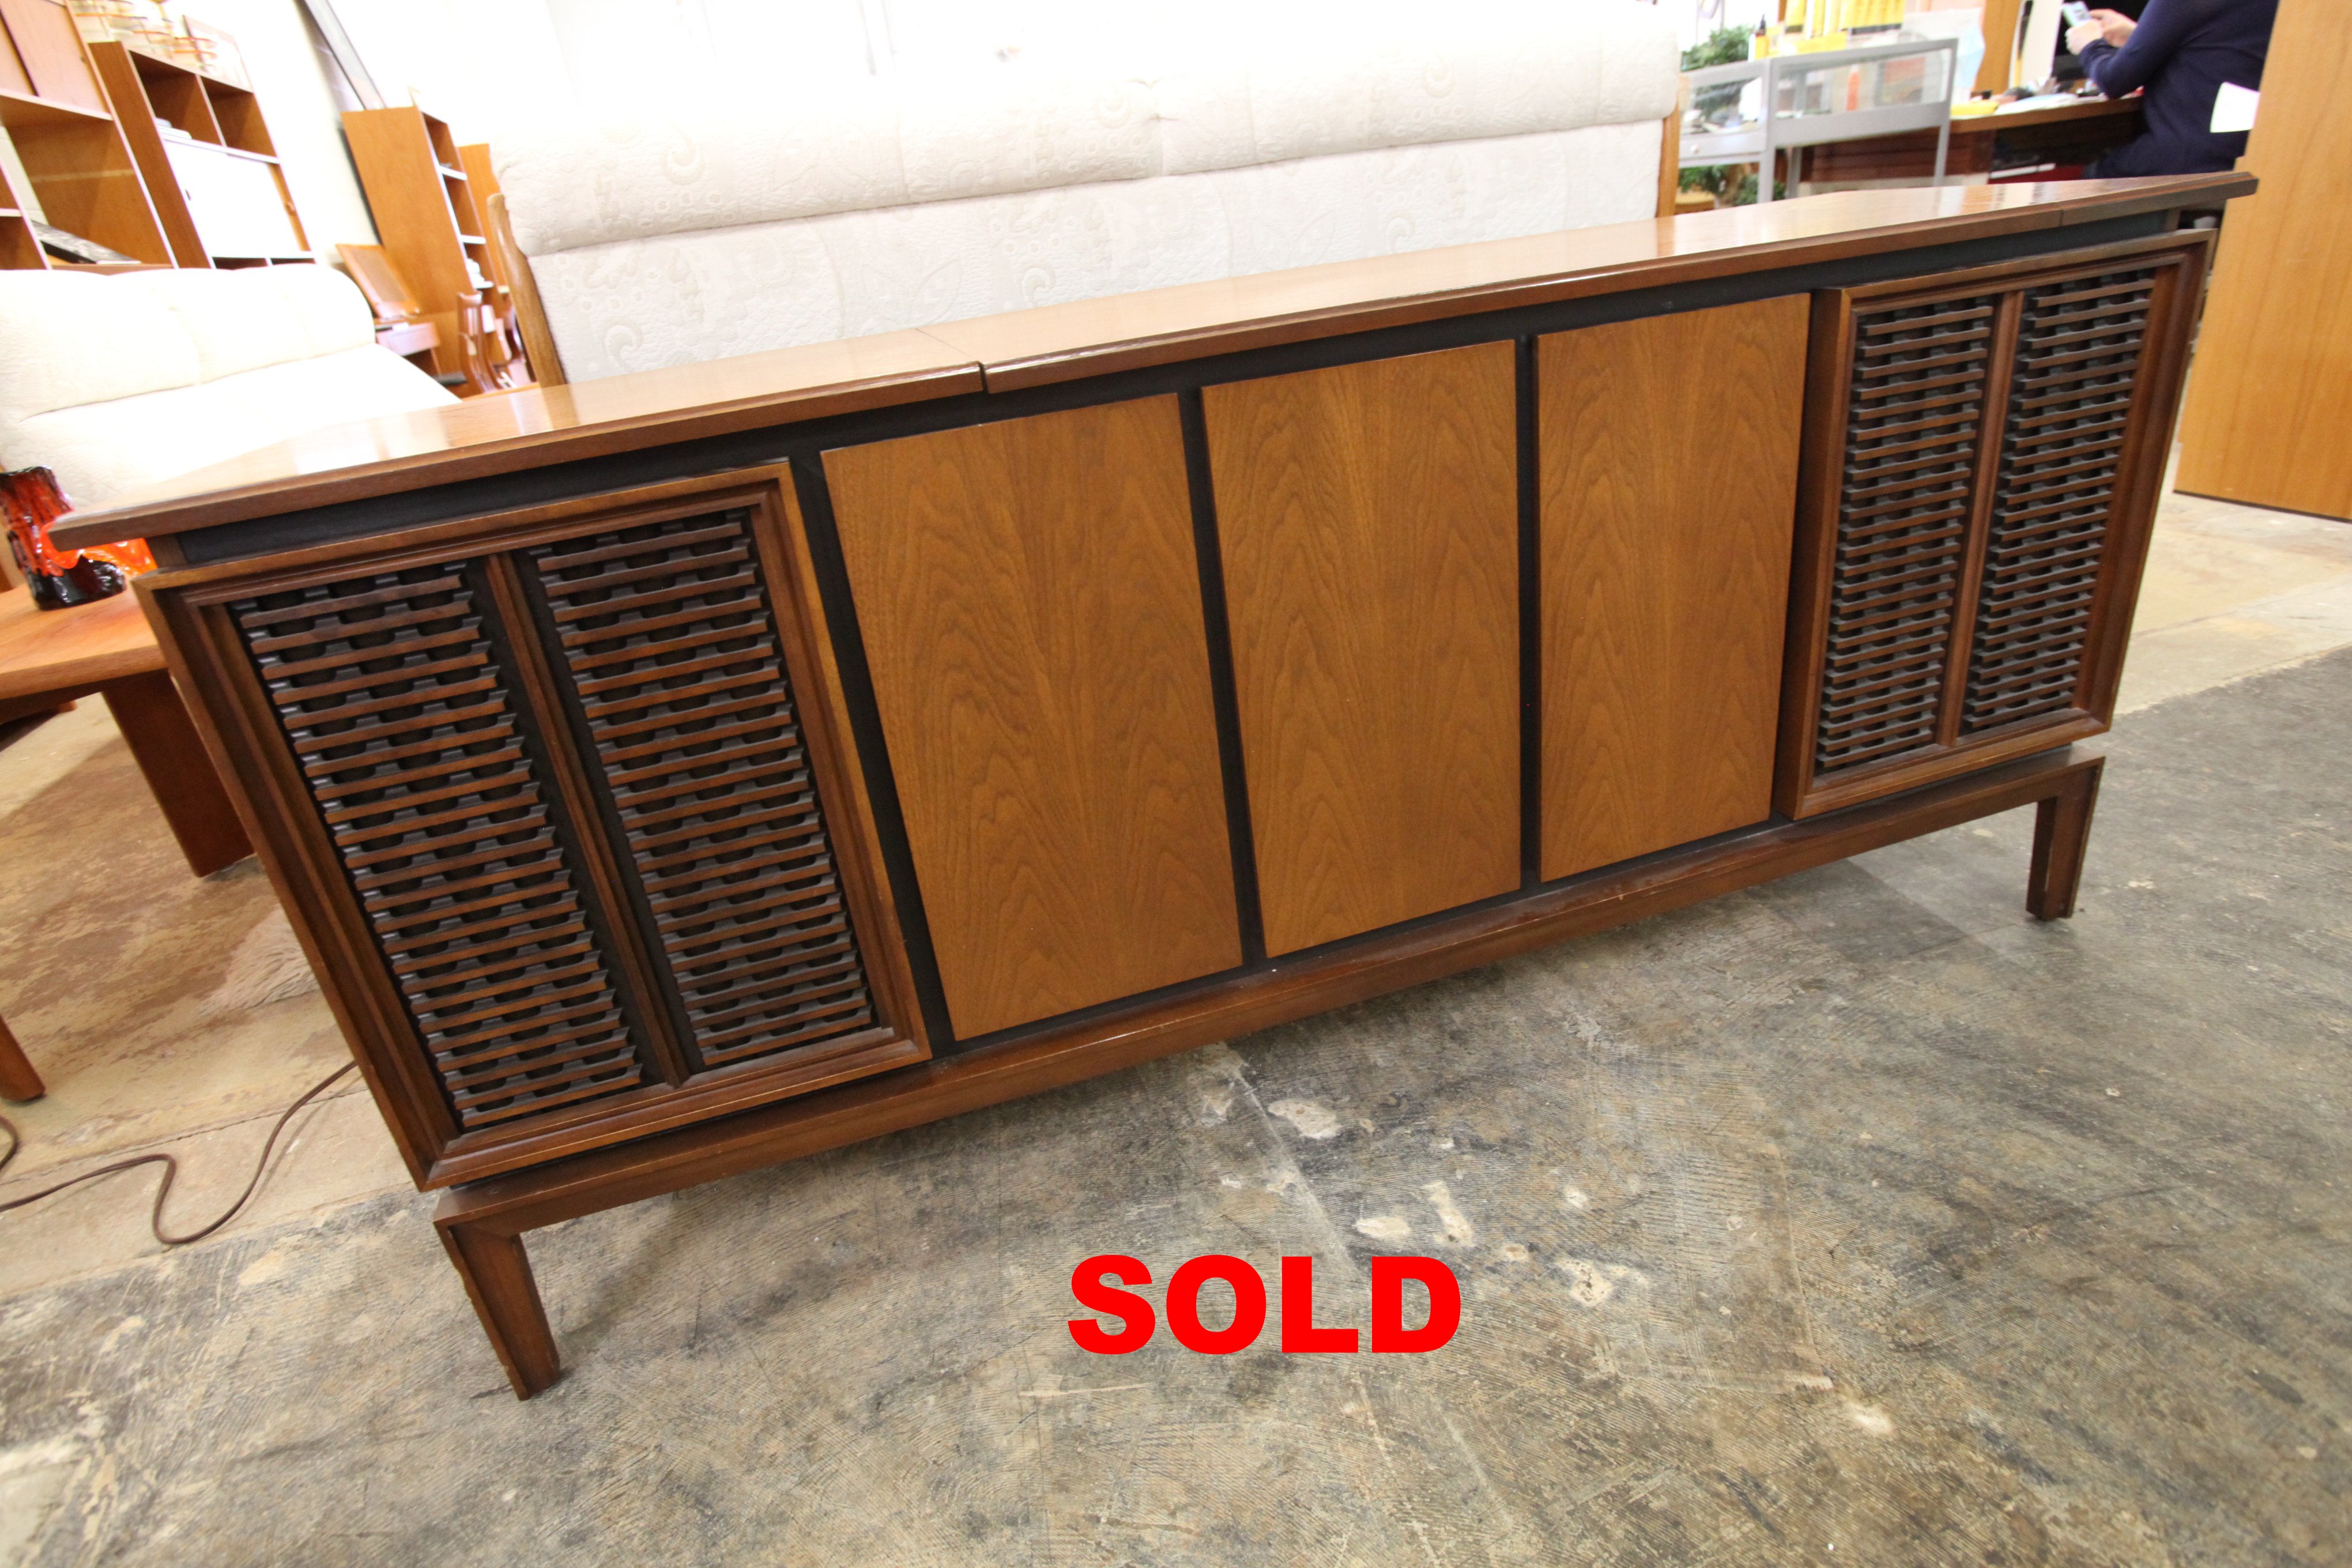 Vintage Phillips Console Stereo Cabinet (60"W x 27.25"H x 17"D)